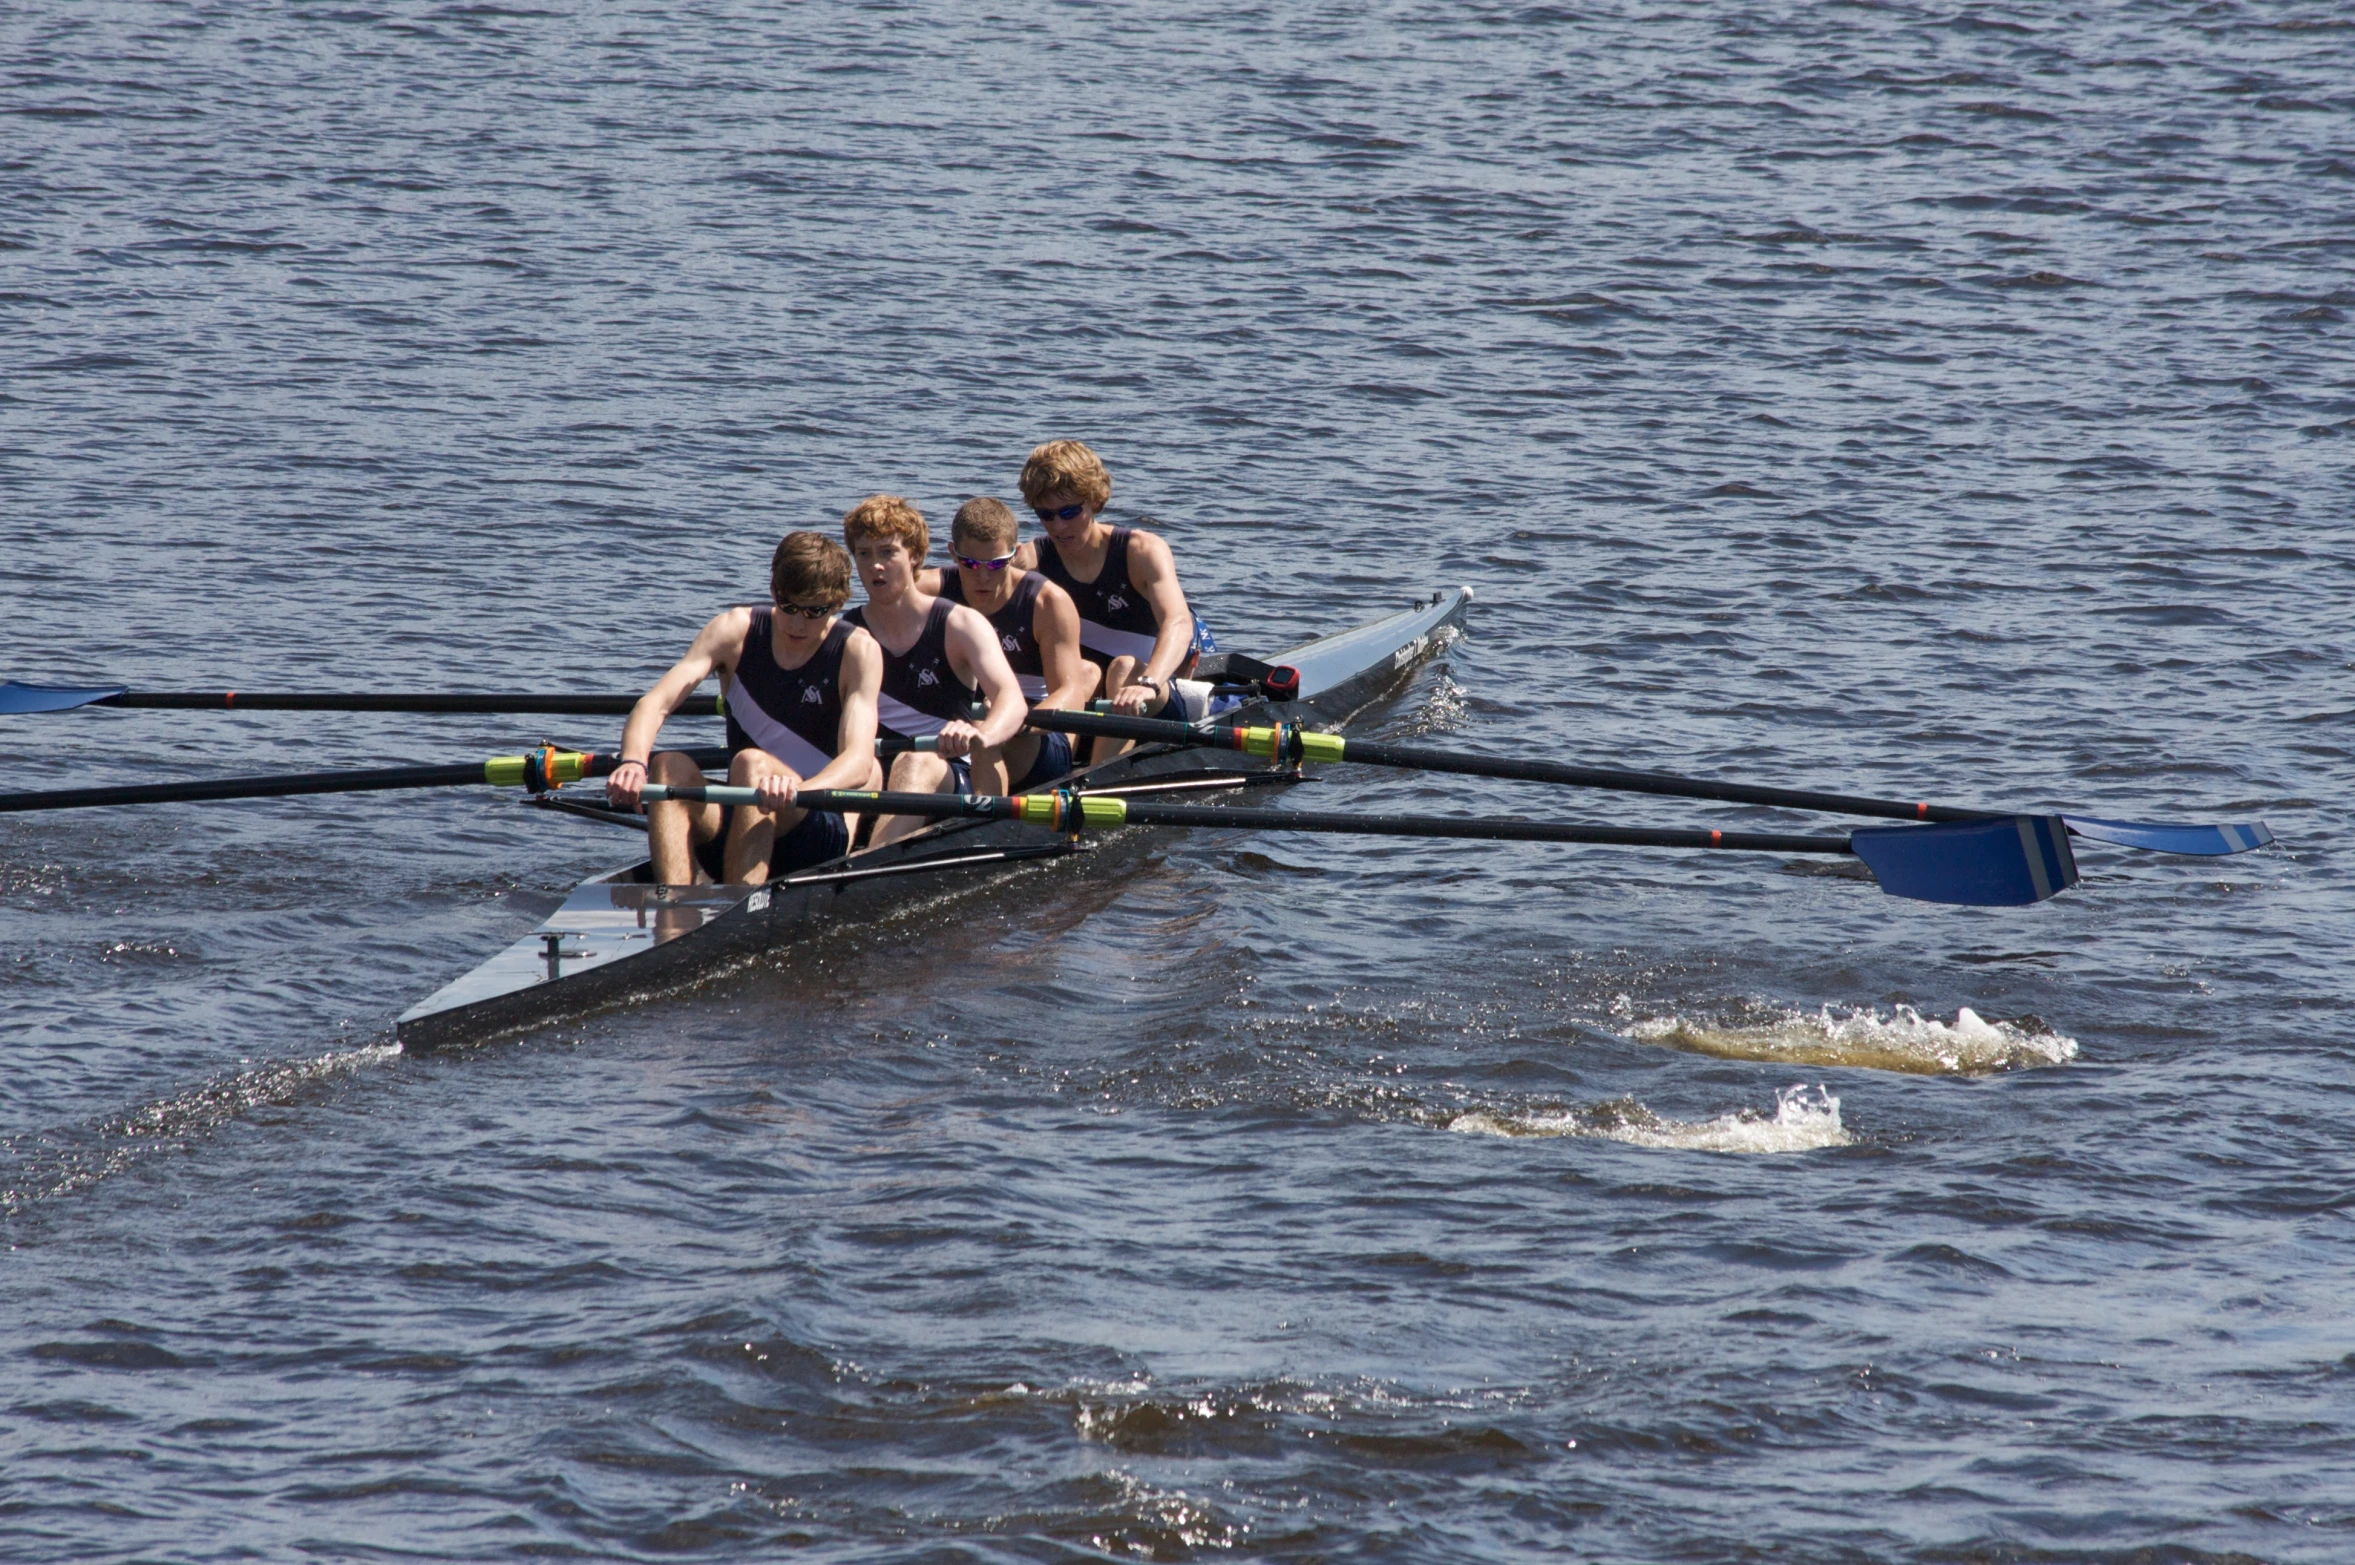 four people rowing in a single boat on the water